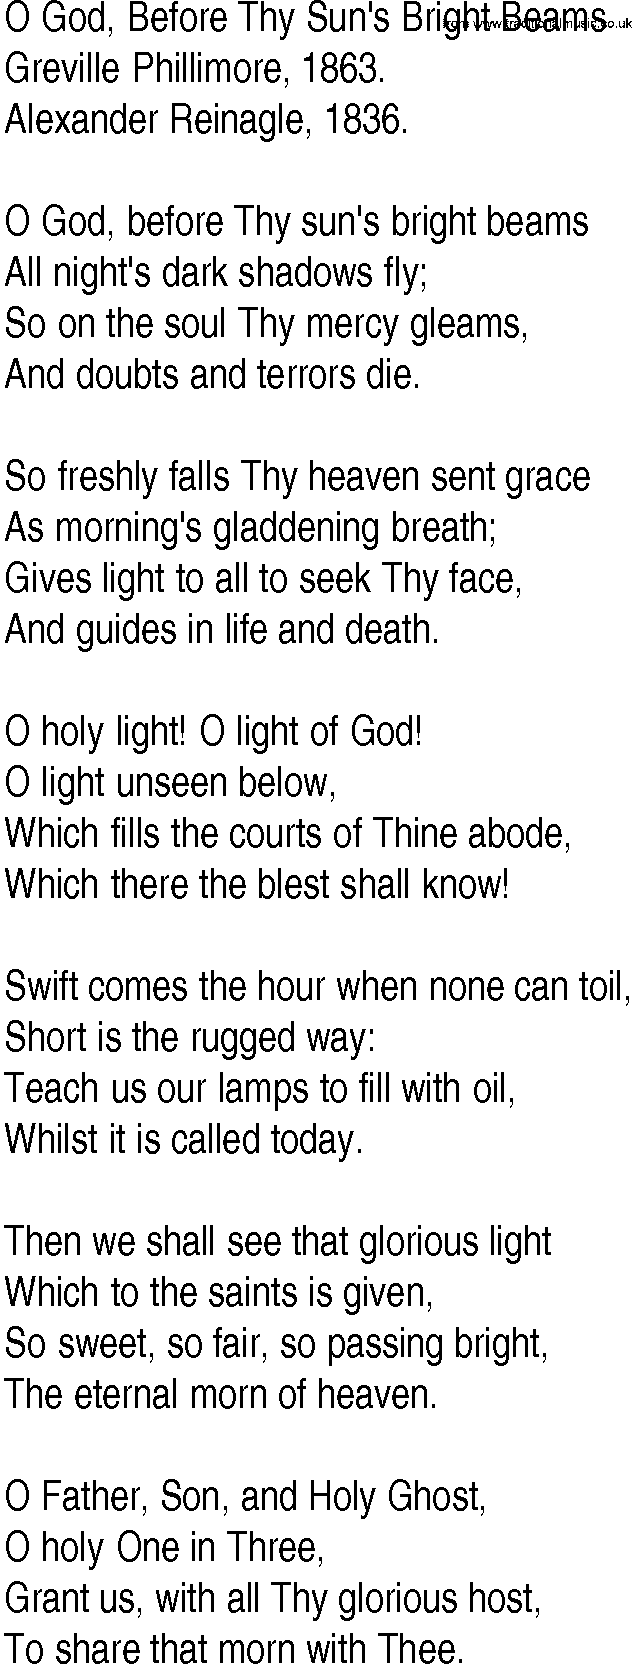 Hymn and Gospel Song Lyrics for O God, Before Thy Sun's Bright Beams by ...